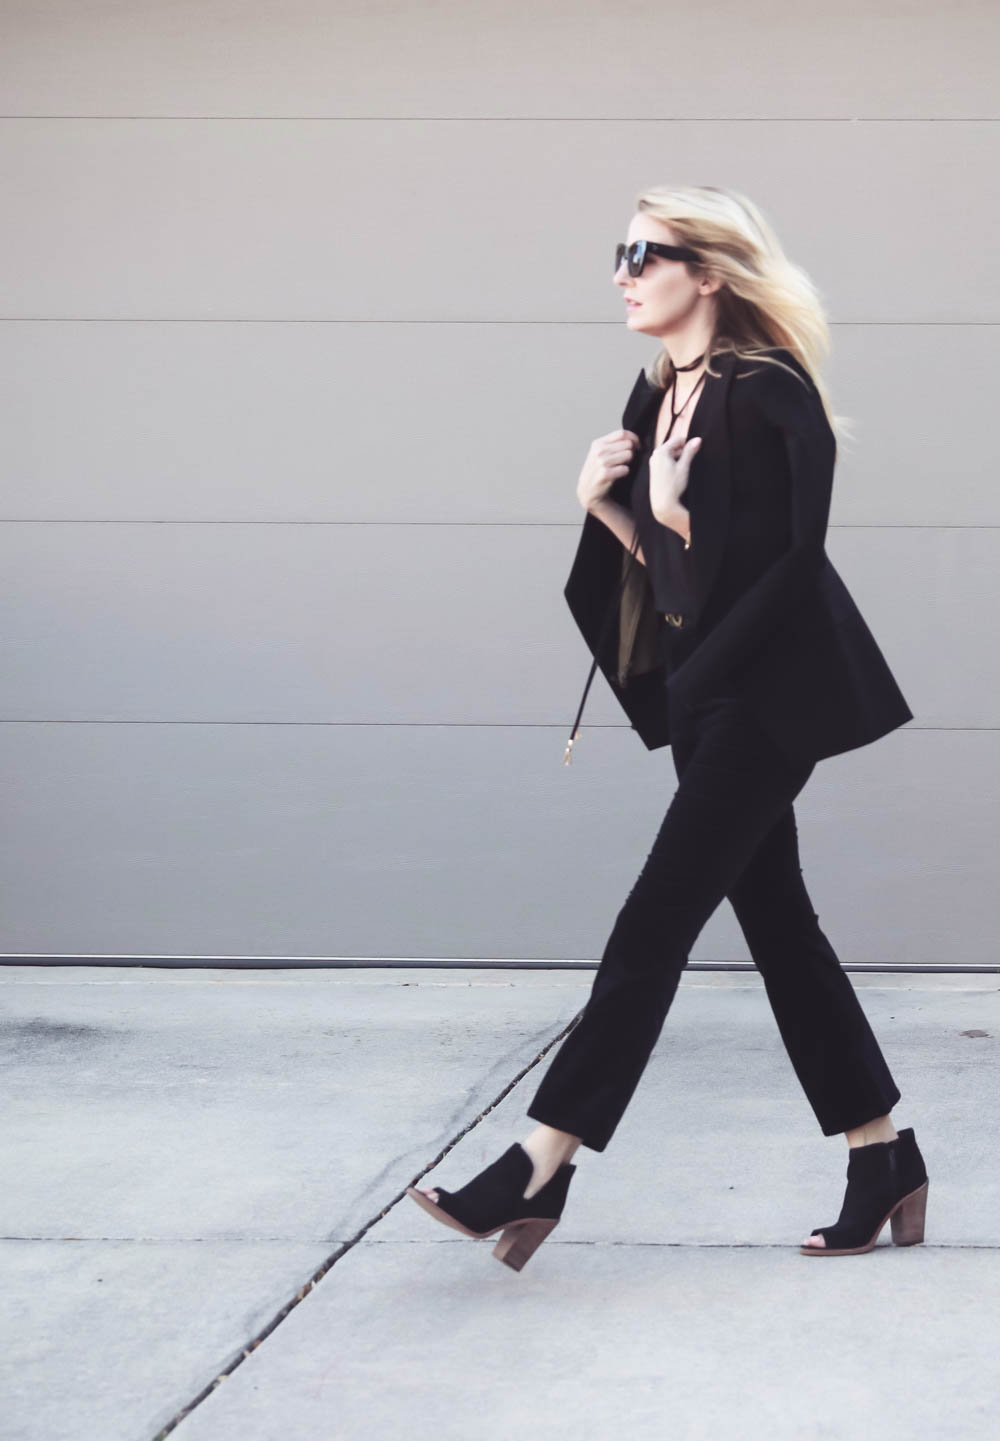 Erin Busbee, fashion blogger and wardrobe stylist from Busbee Style is wearing a Baublebar lariat choker necklace in black paired with a veronica beard scuba blazer and cropped, flared pants by Rag and Bone with Vince Camuto peep toe booties in black. Wear all one color to look longer and taller